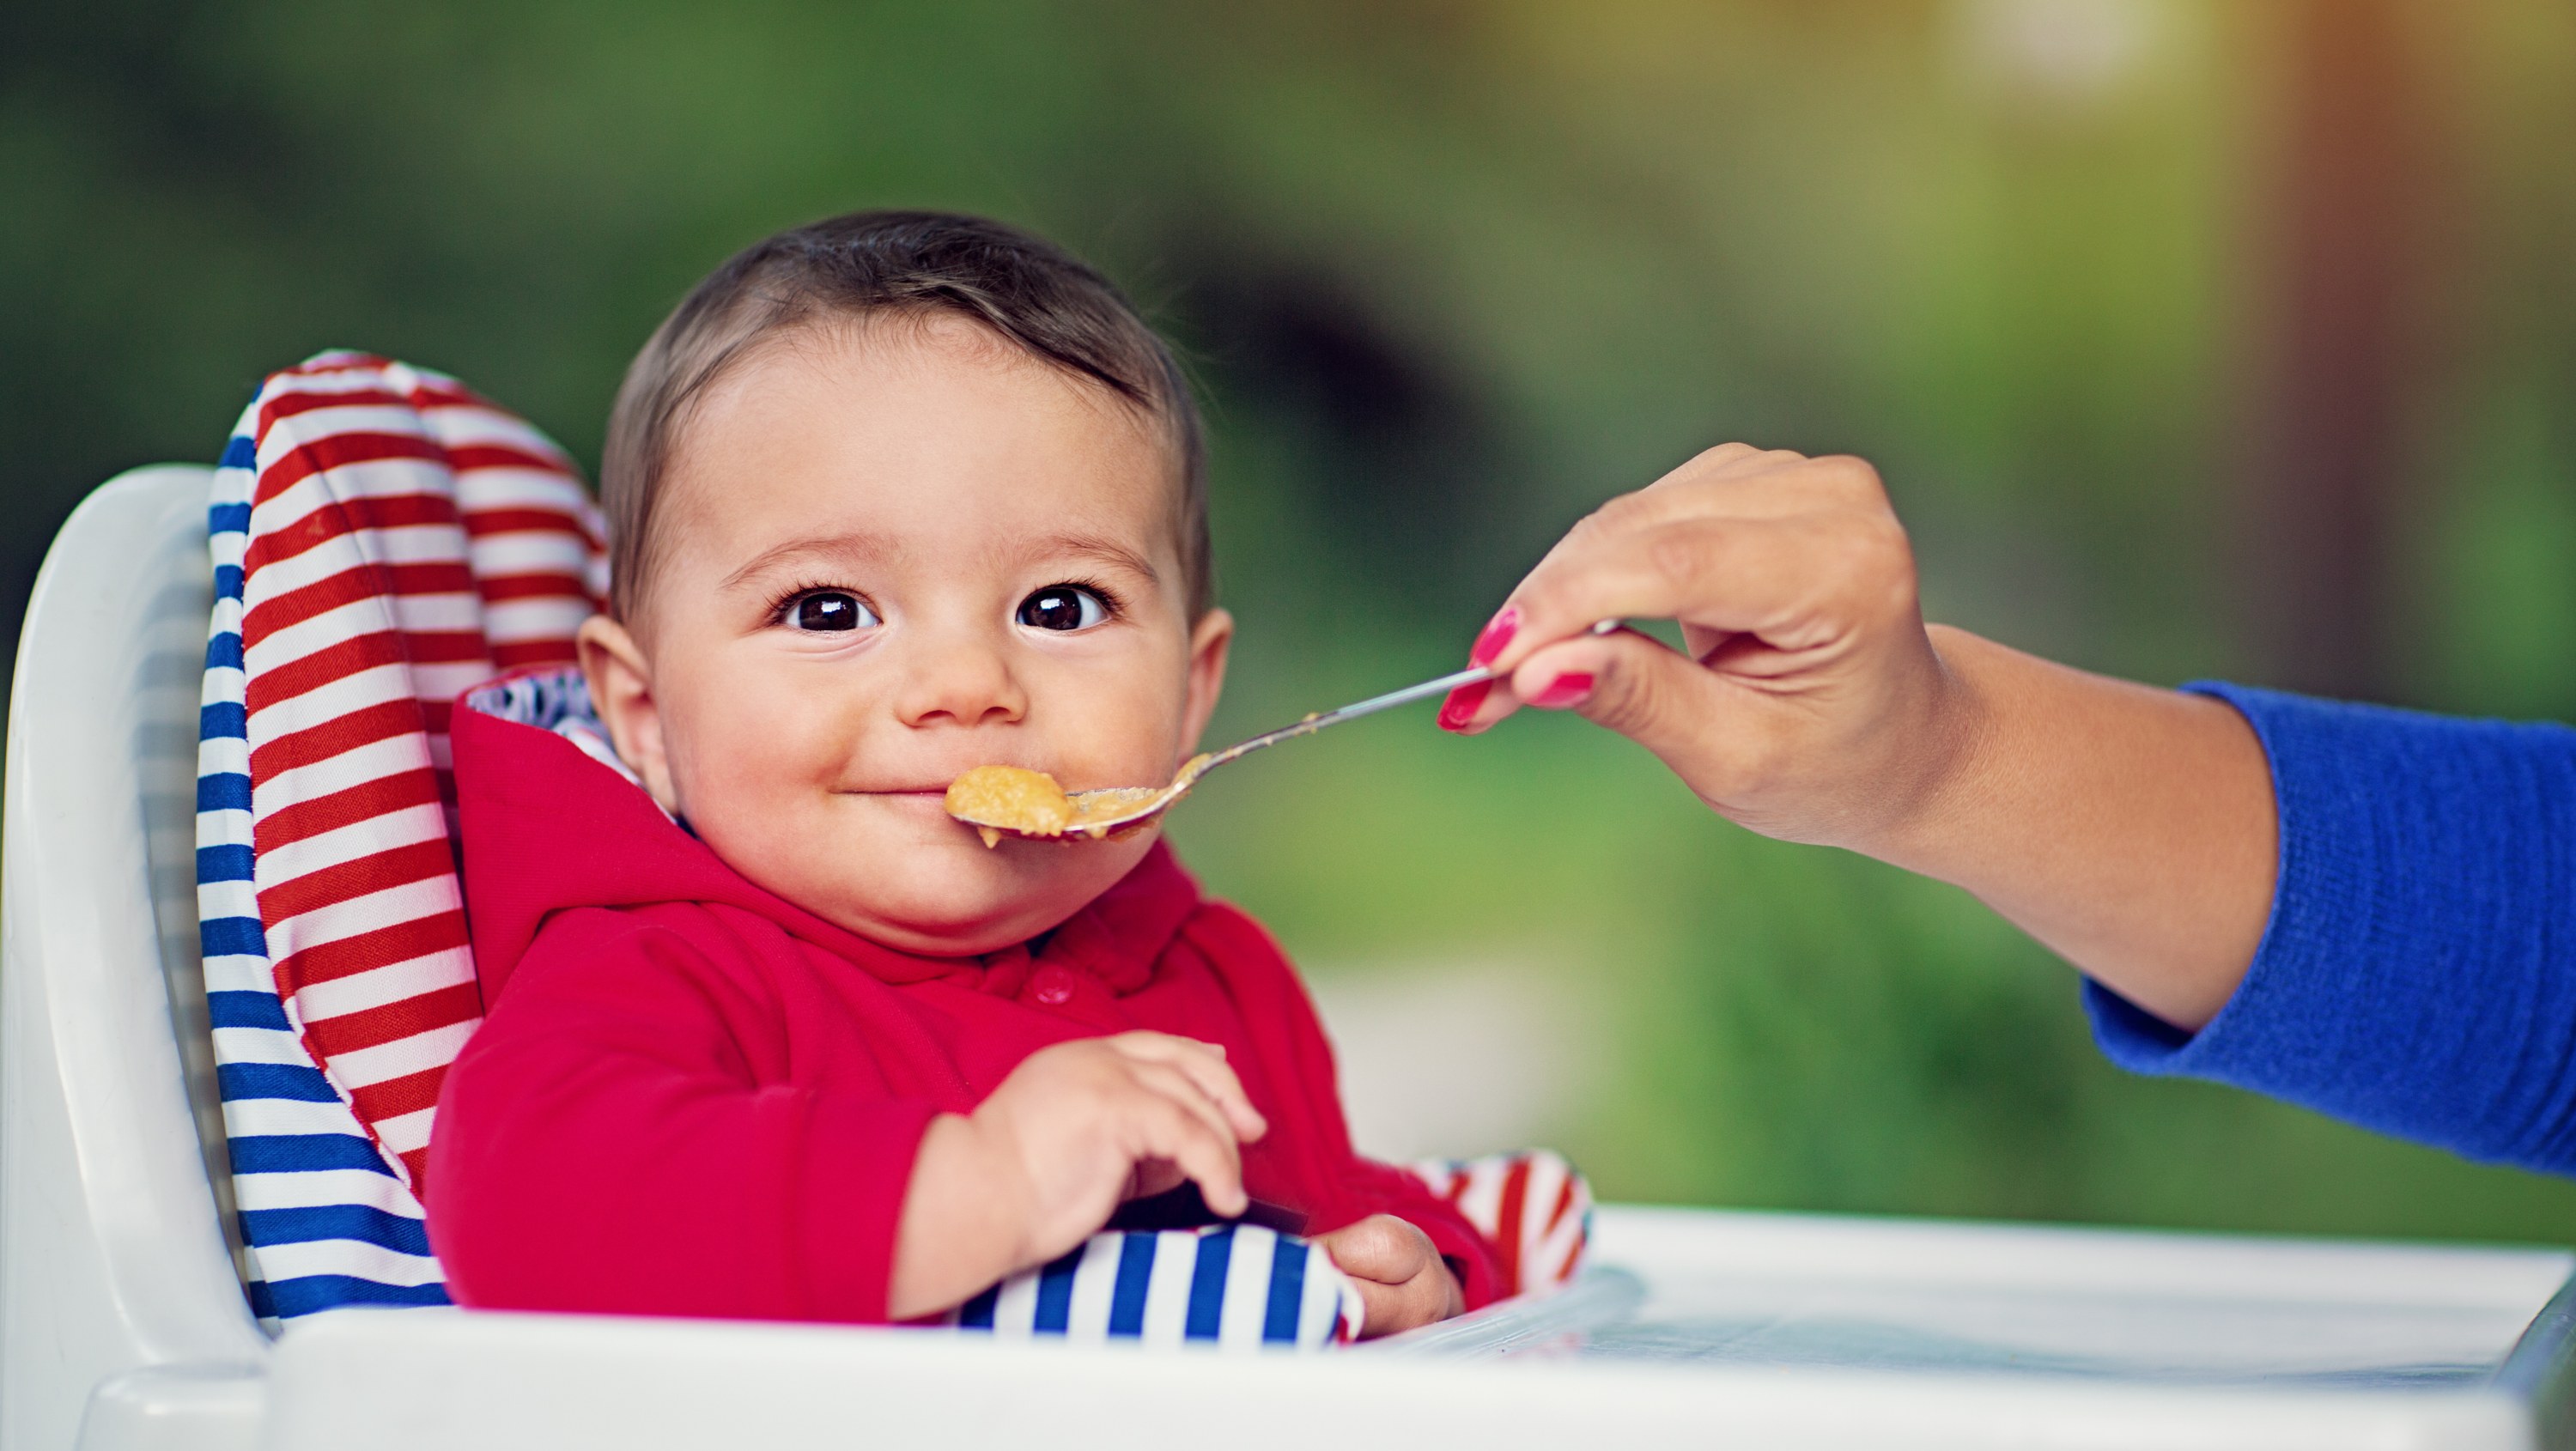 Child being fed